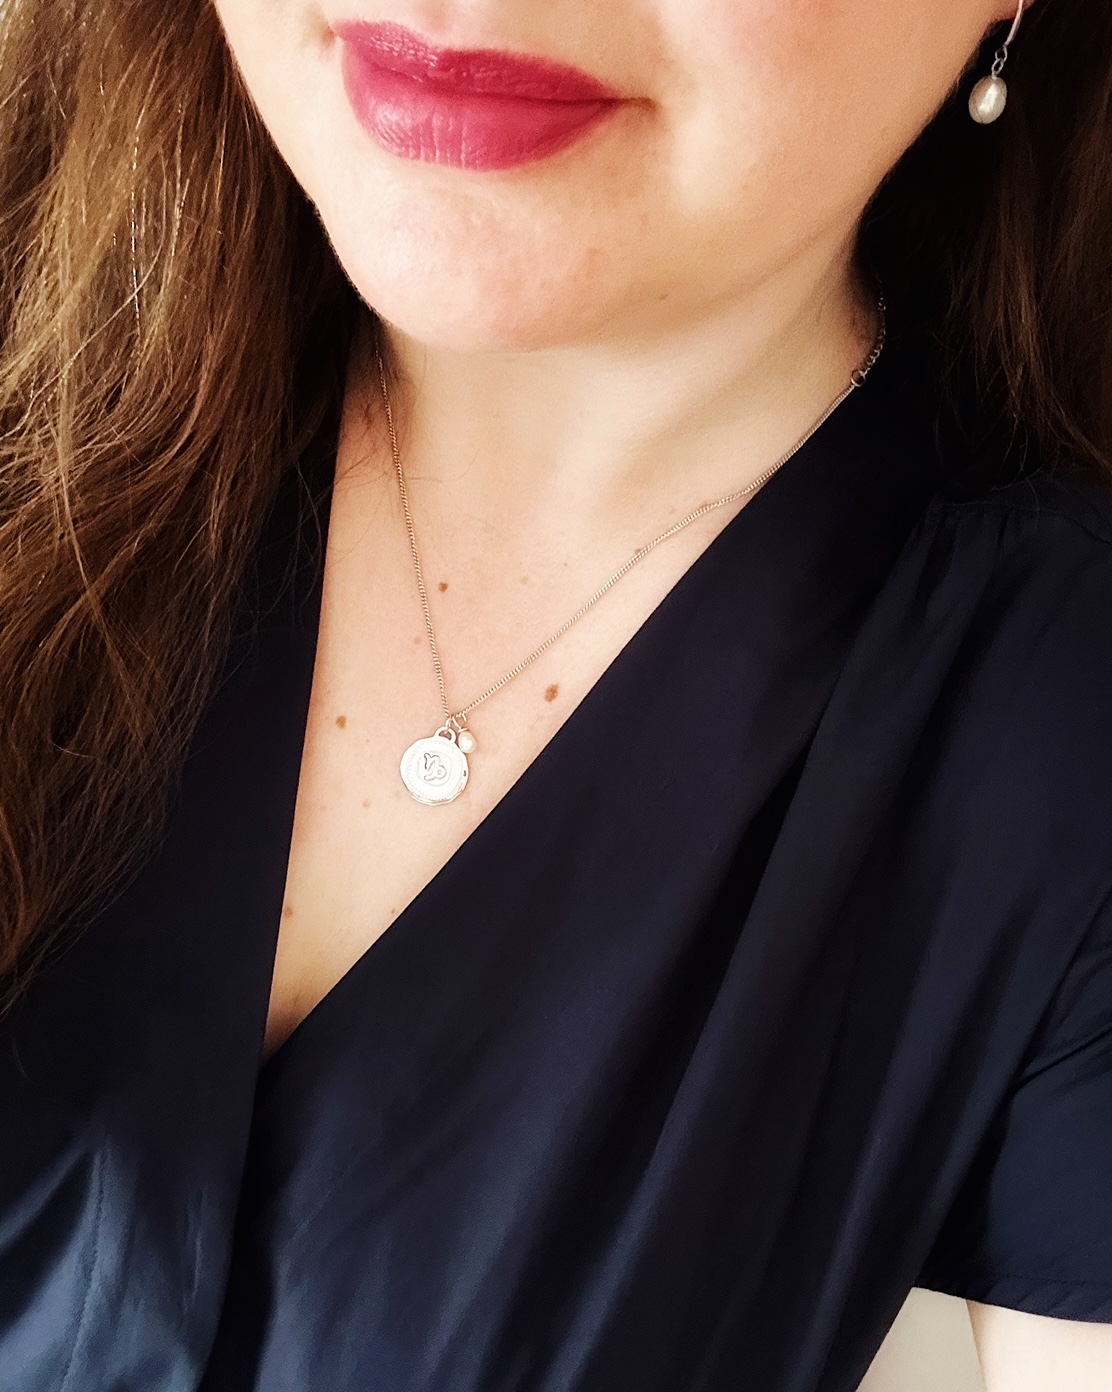 Claudia Bradby CB Zodiacs Pendant Necklace and classic pearl drop earrings being worn